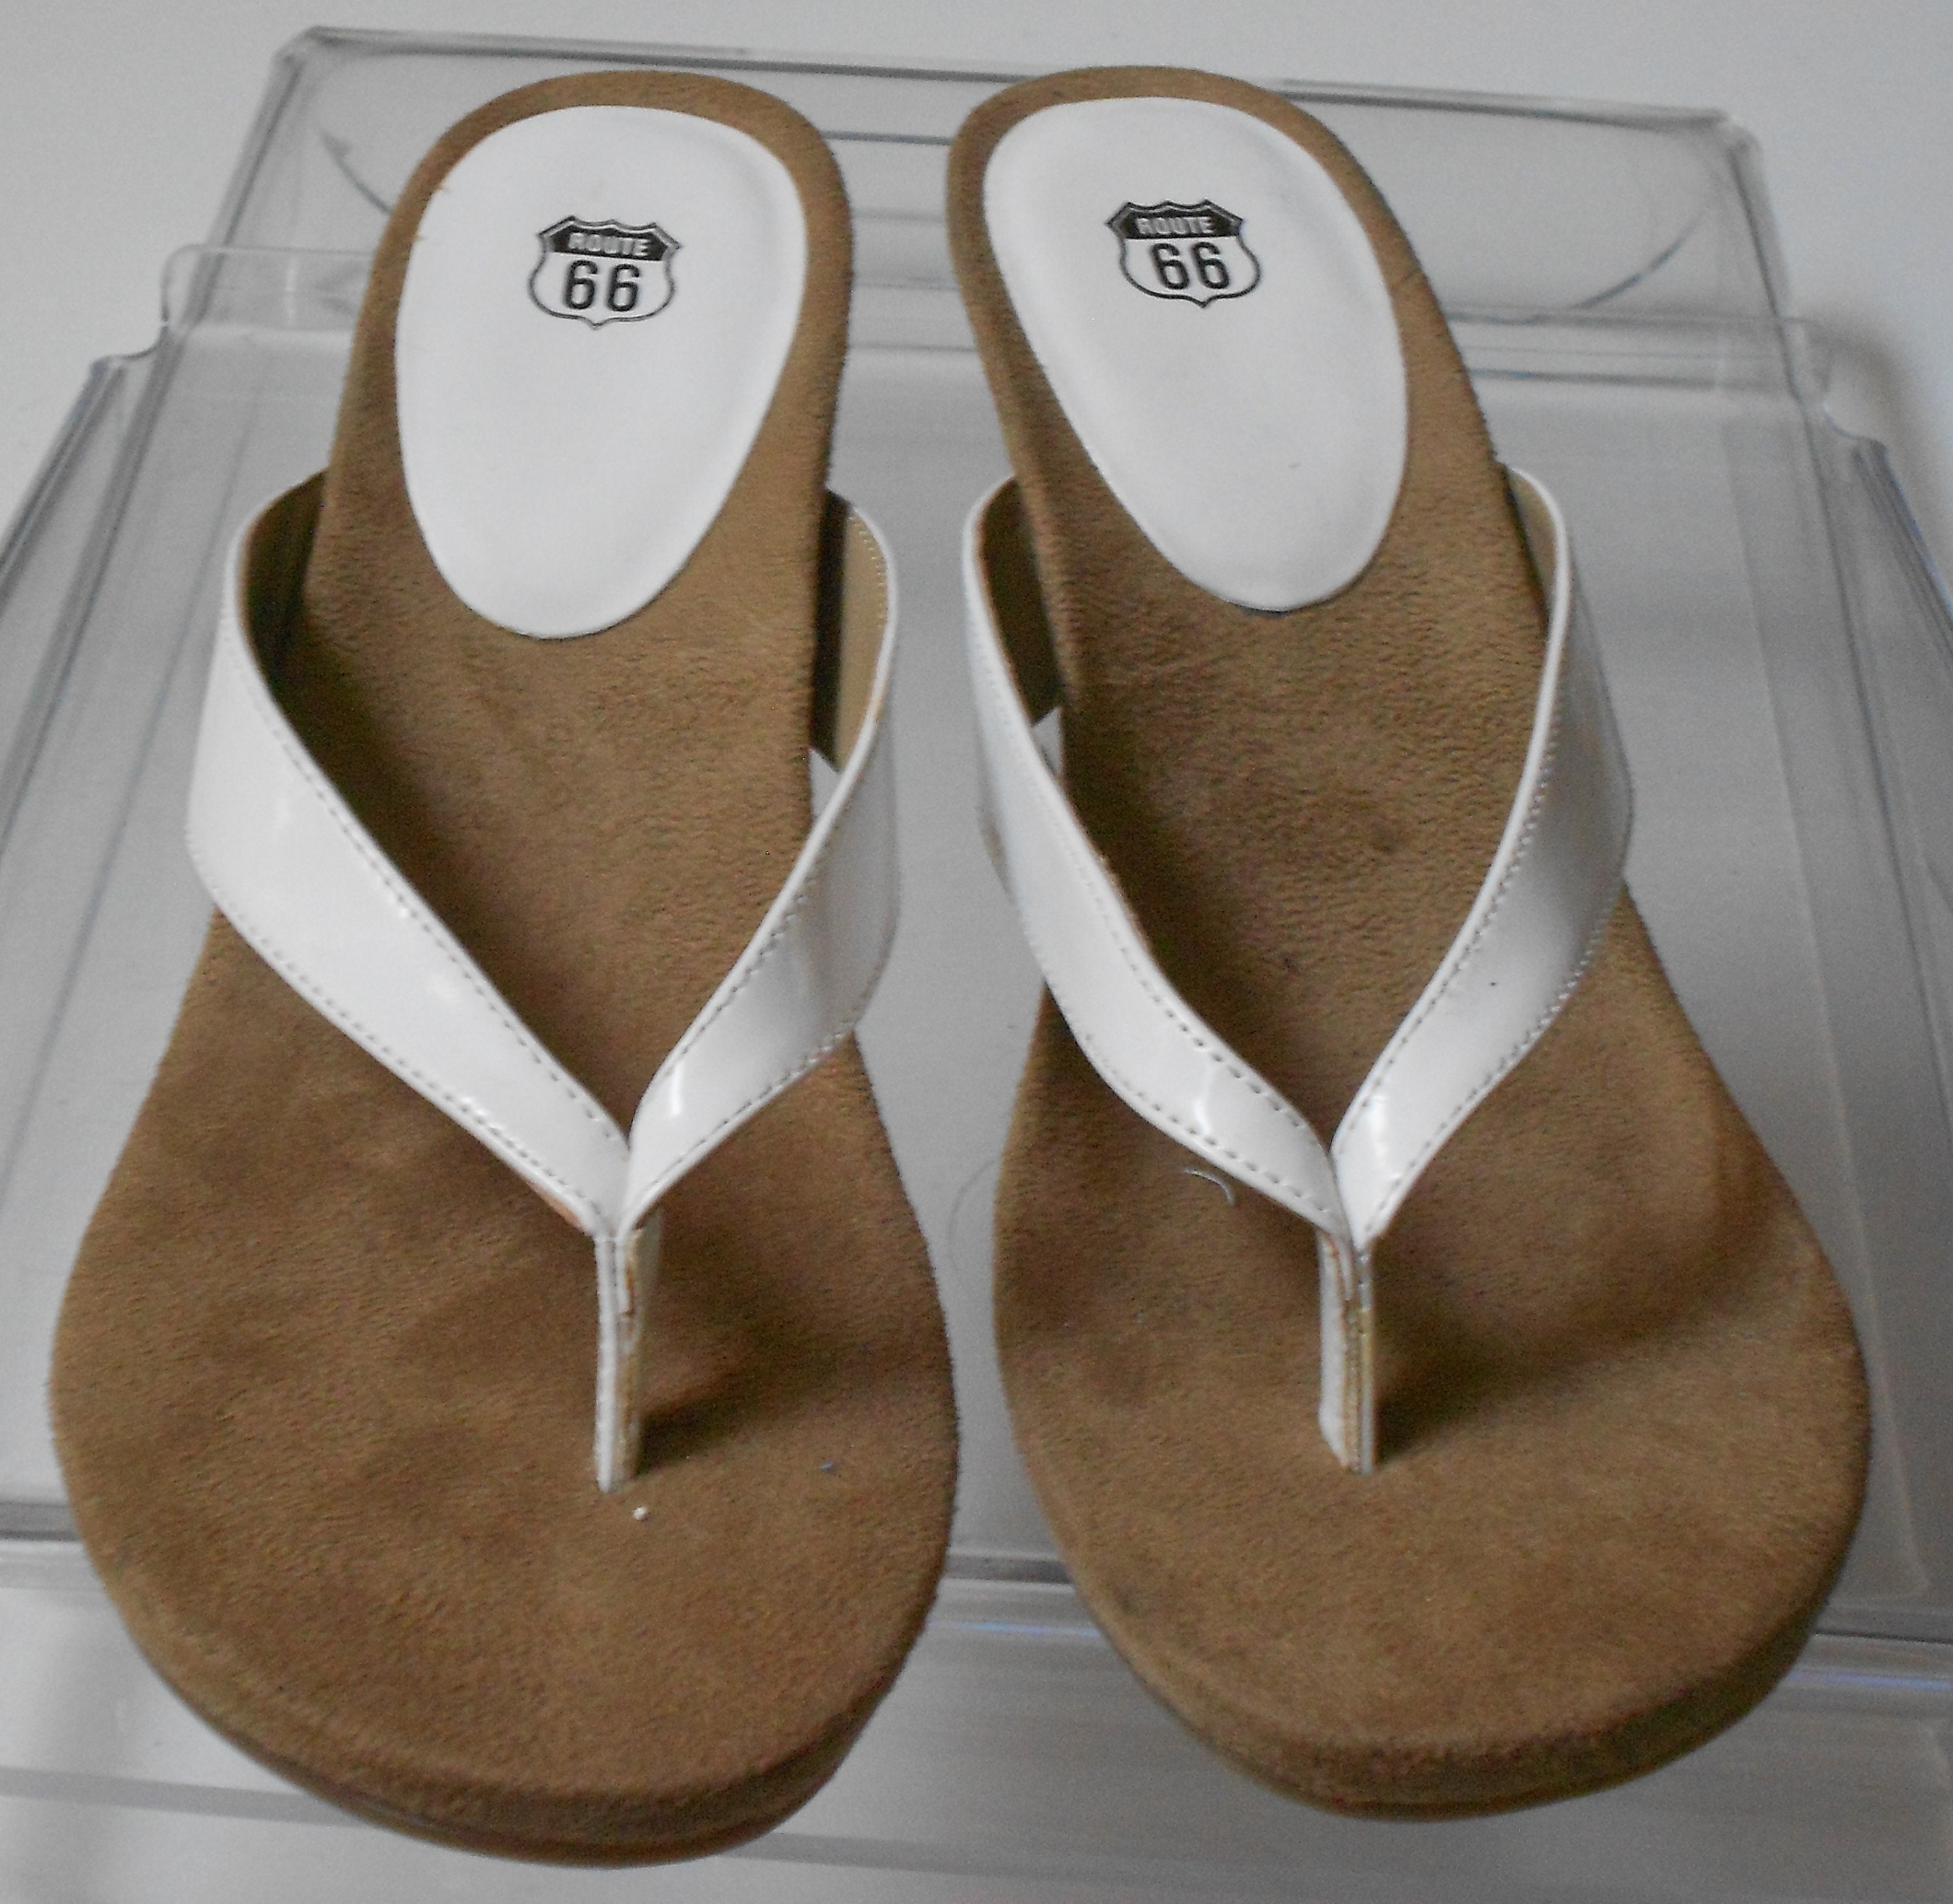 VKC Pride 3322 Slippers Size 8 (Tan) in Belgaum at best price by American  Shoes - Justdial